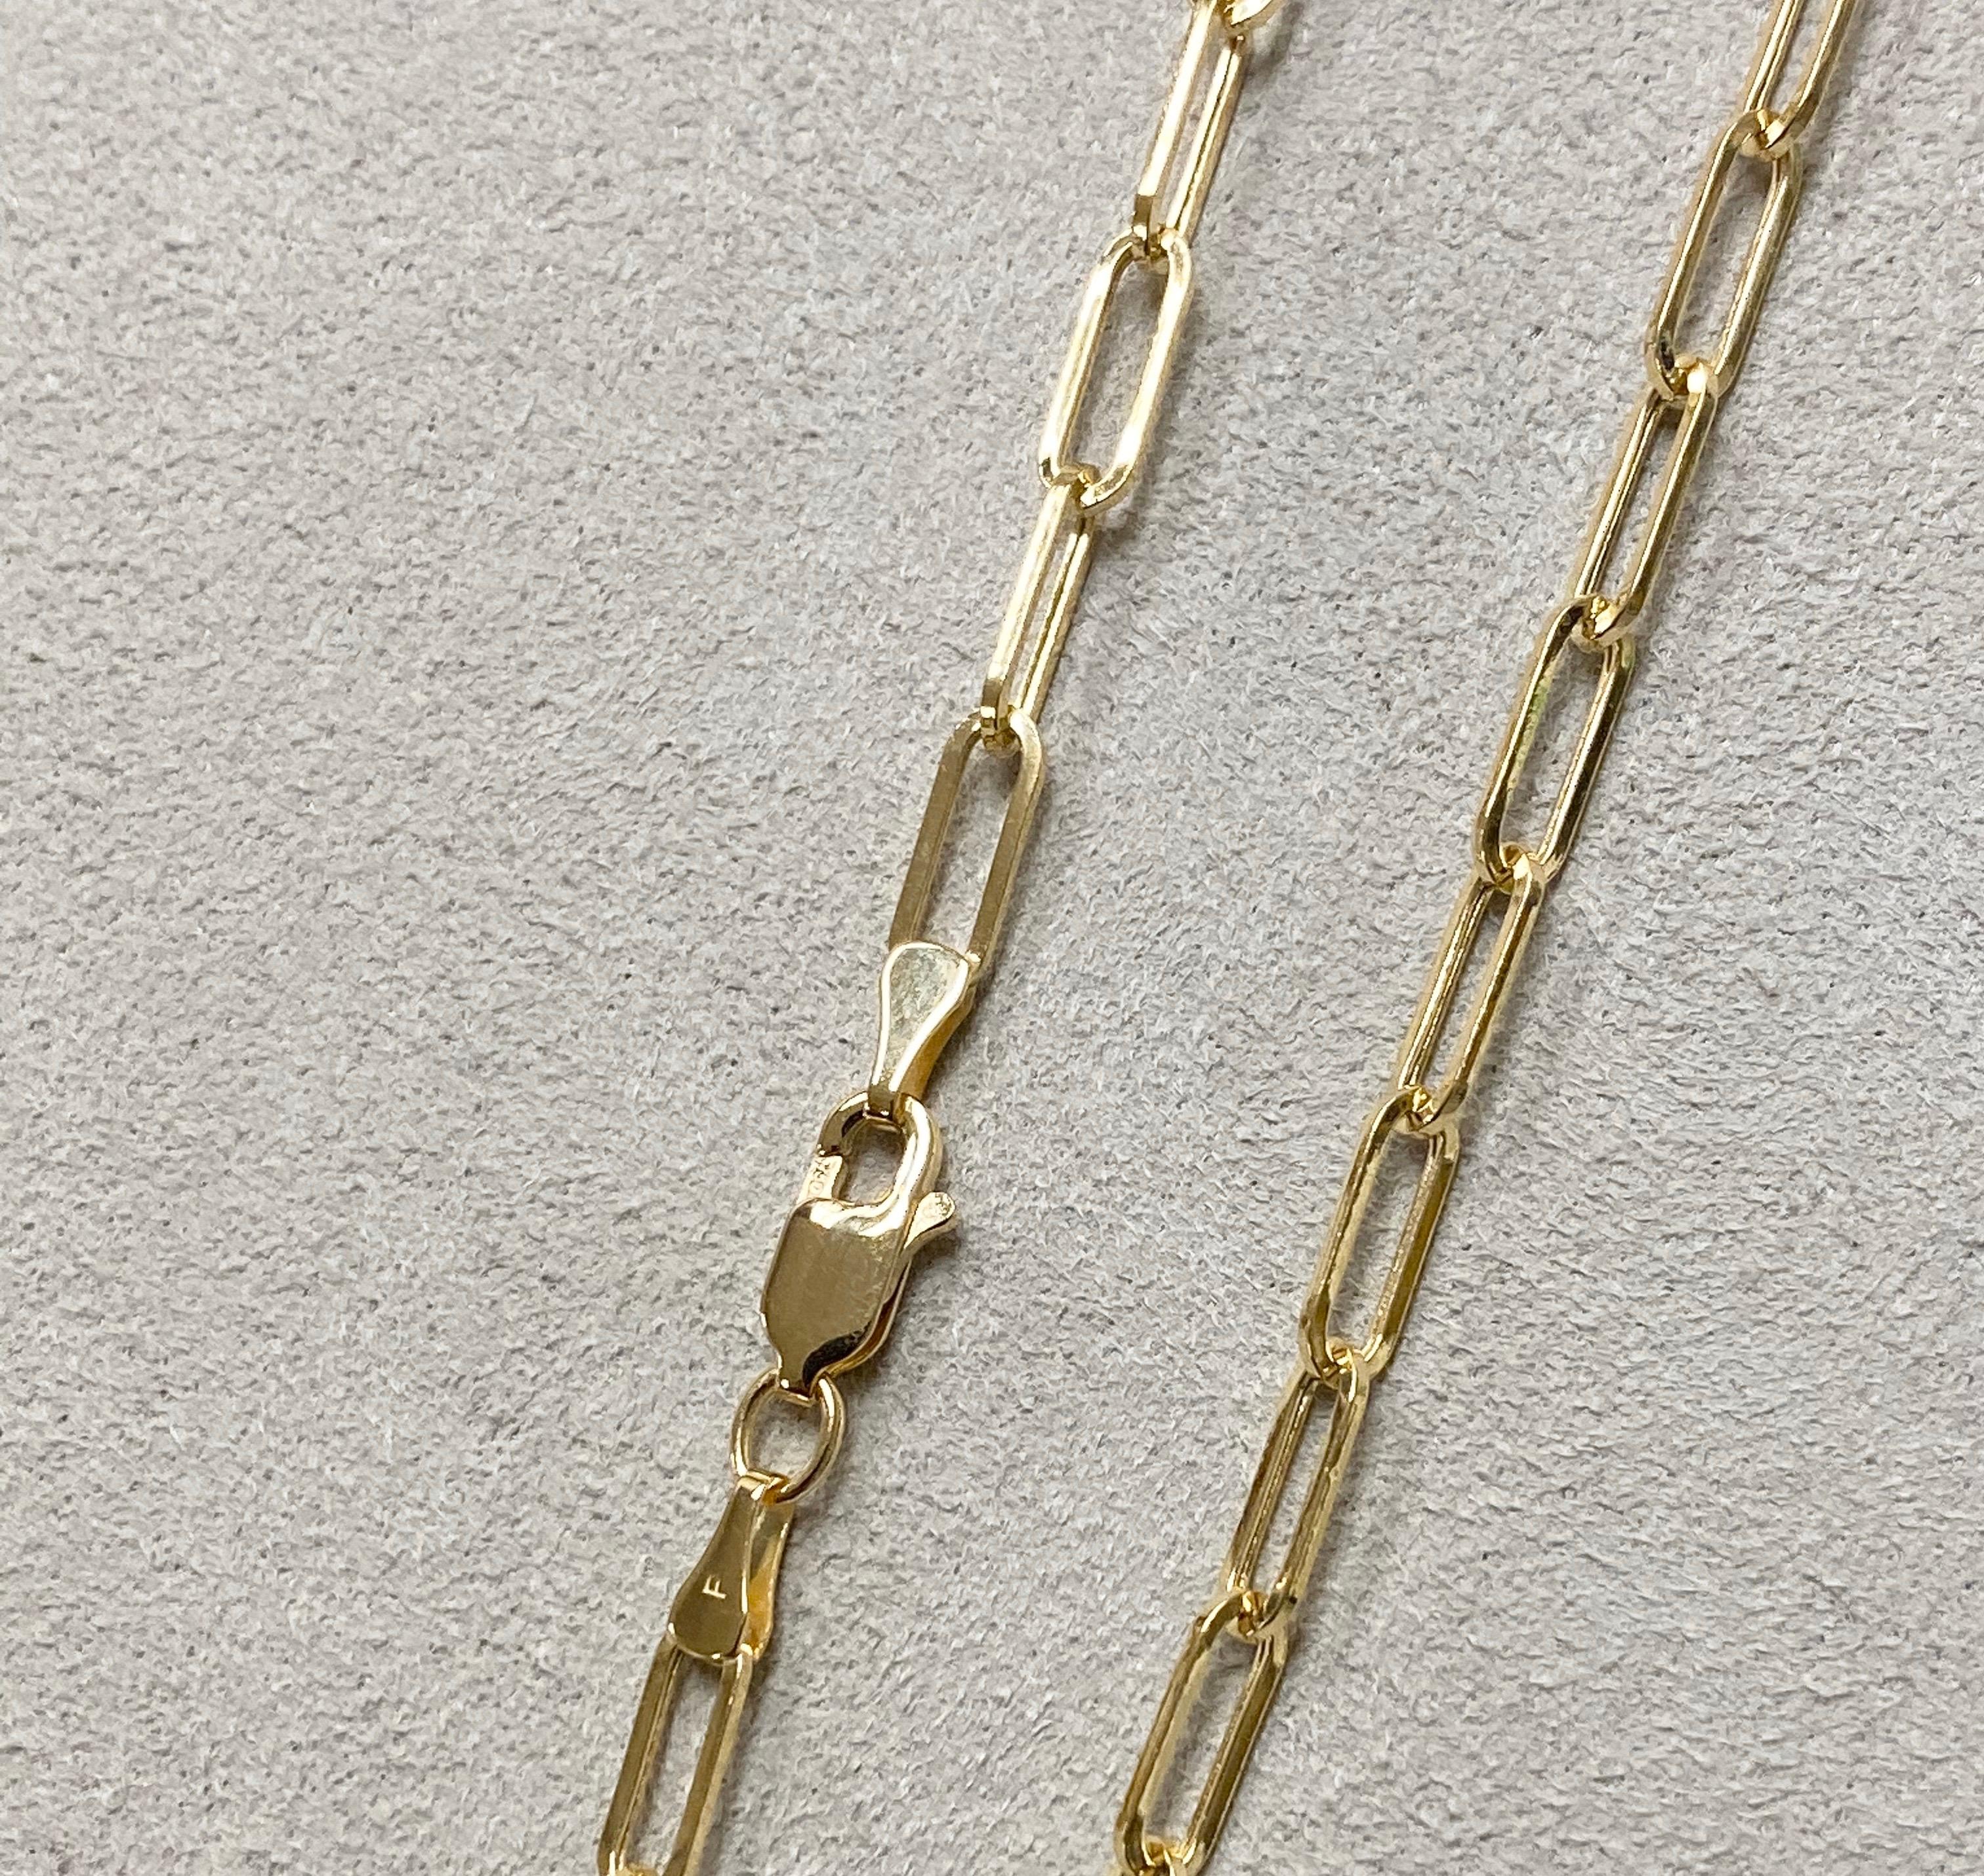 Created in 18 karat yellow gold
30 inch length
Weight 14 grams approx.
18 karat yellow gold lobster clasp
Chain can be clasped at any length
Also available in various lengths


About the Designers ~ Dharmesh & Namrata

Drawing inspiration from